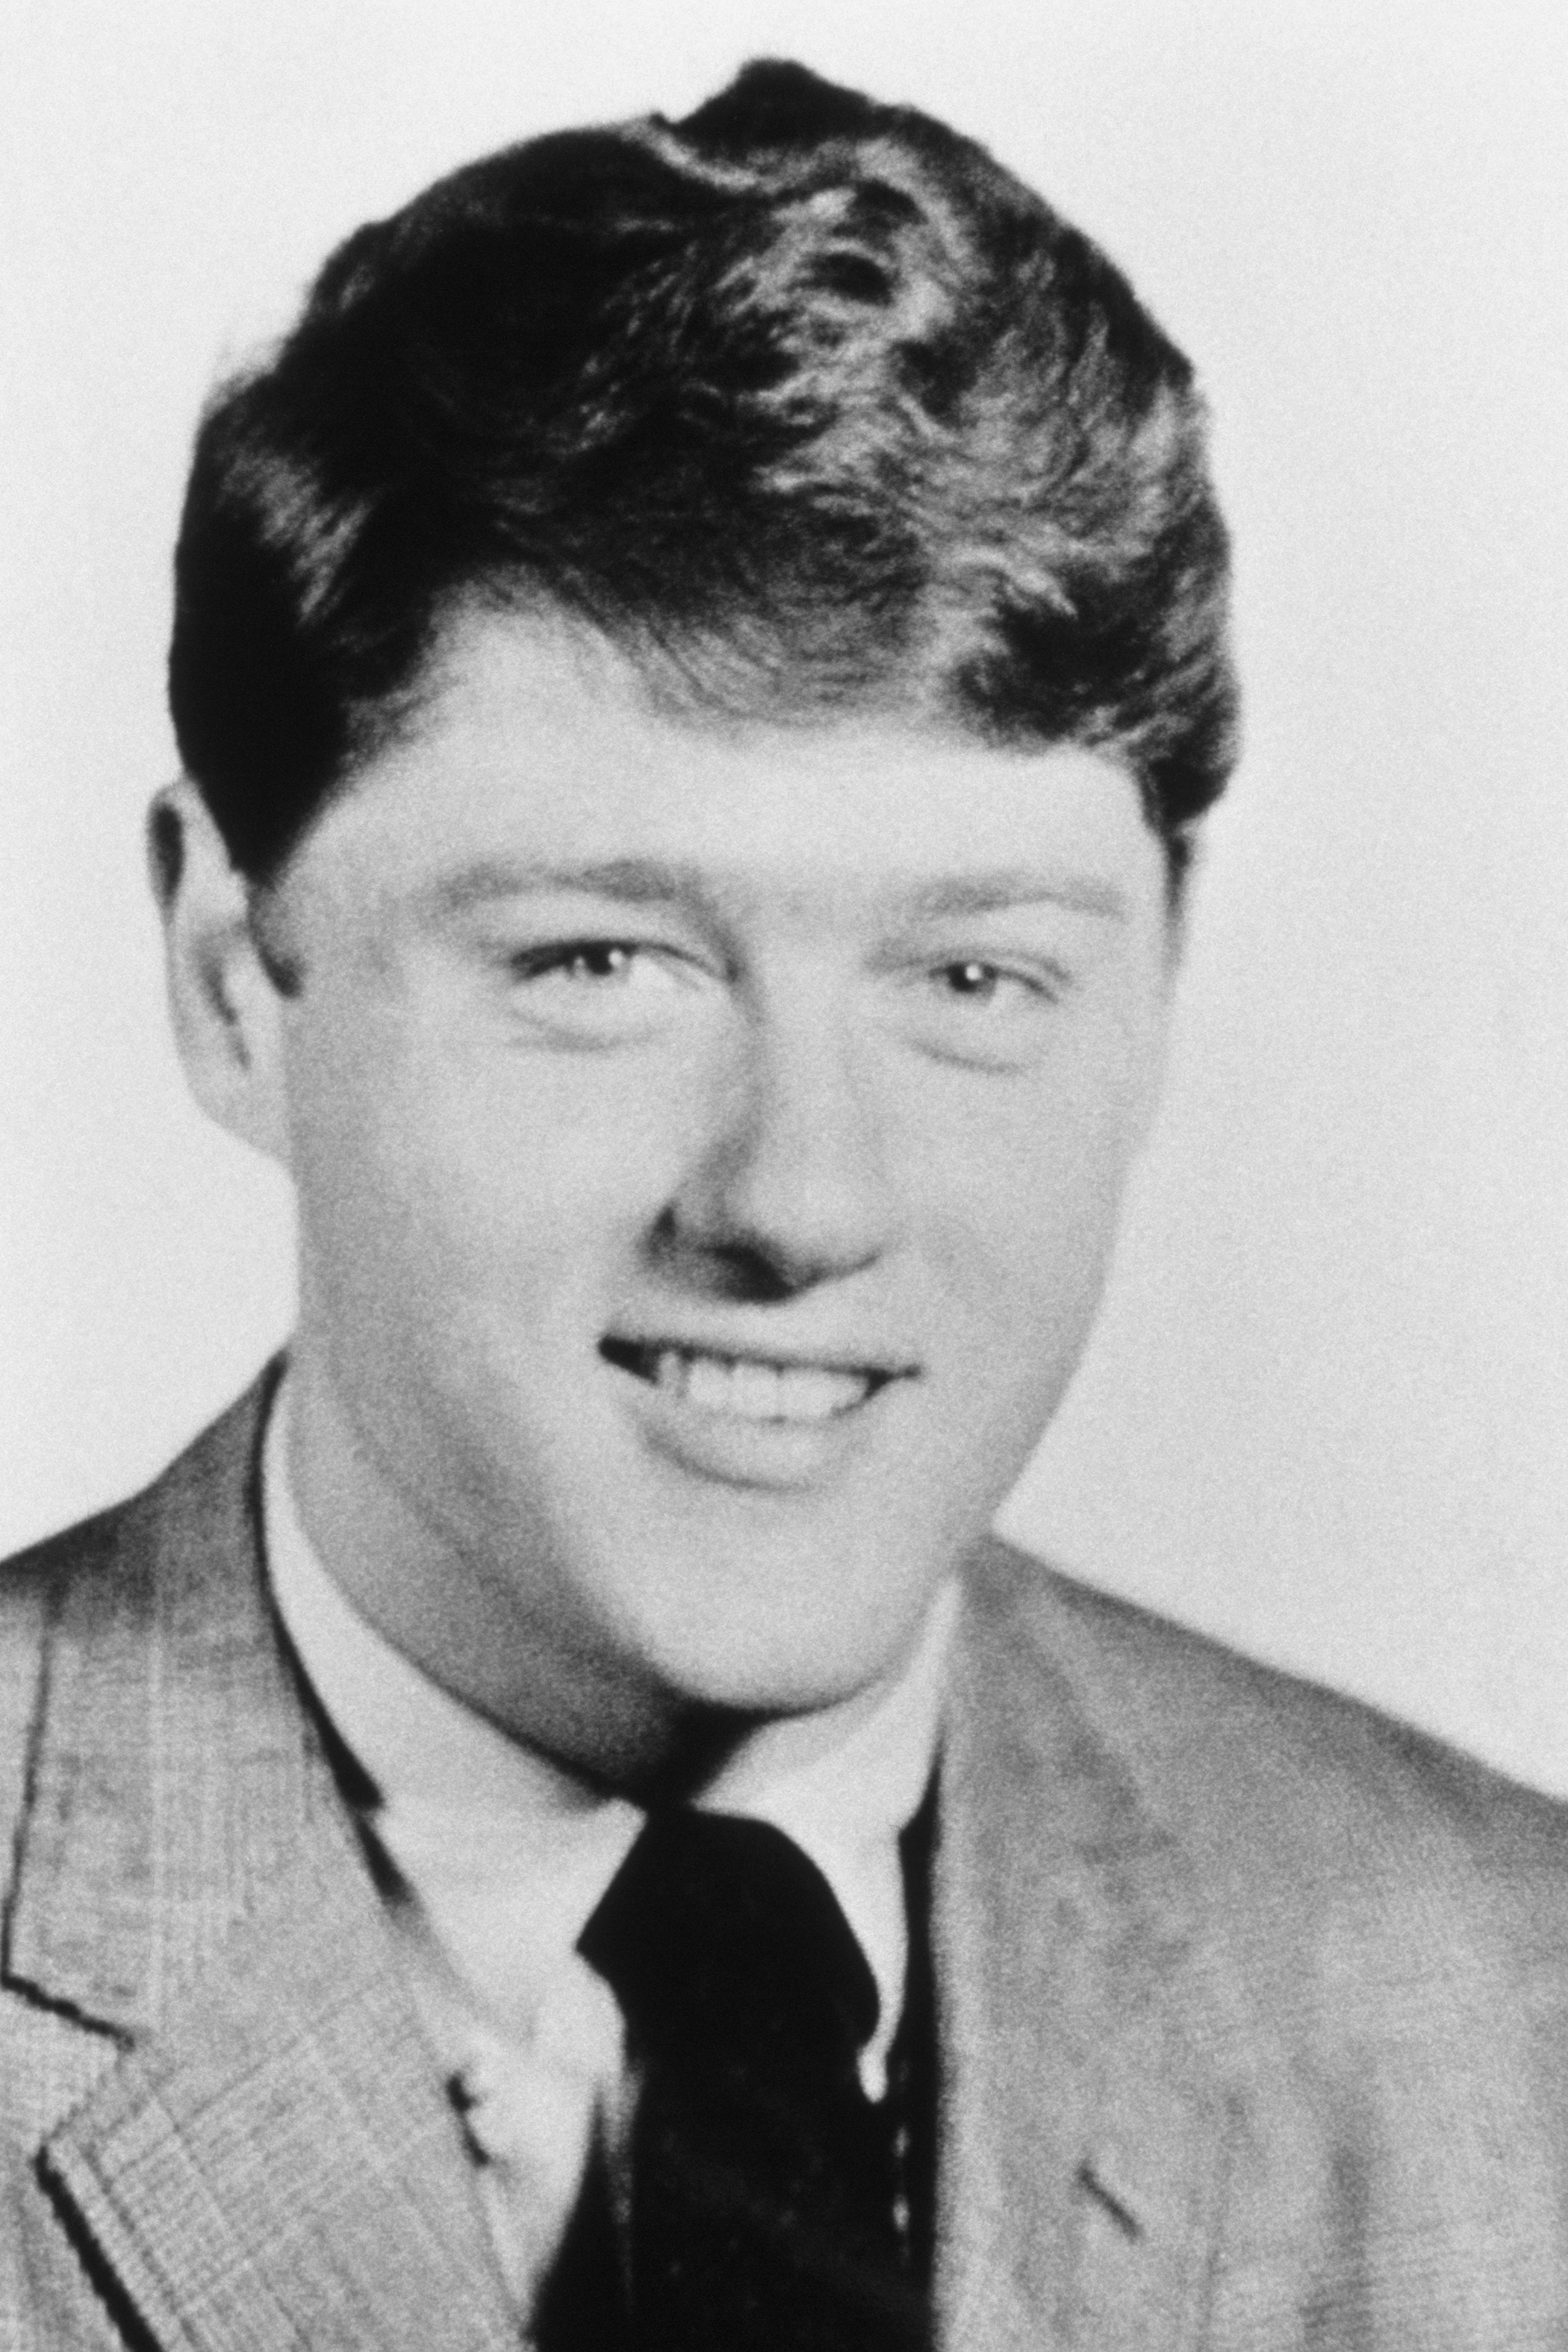 Former President Bill Clinton at Oxford in the summer of 1968, having just graduated from Georgetown University earlier that year